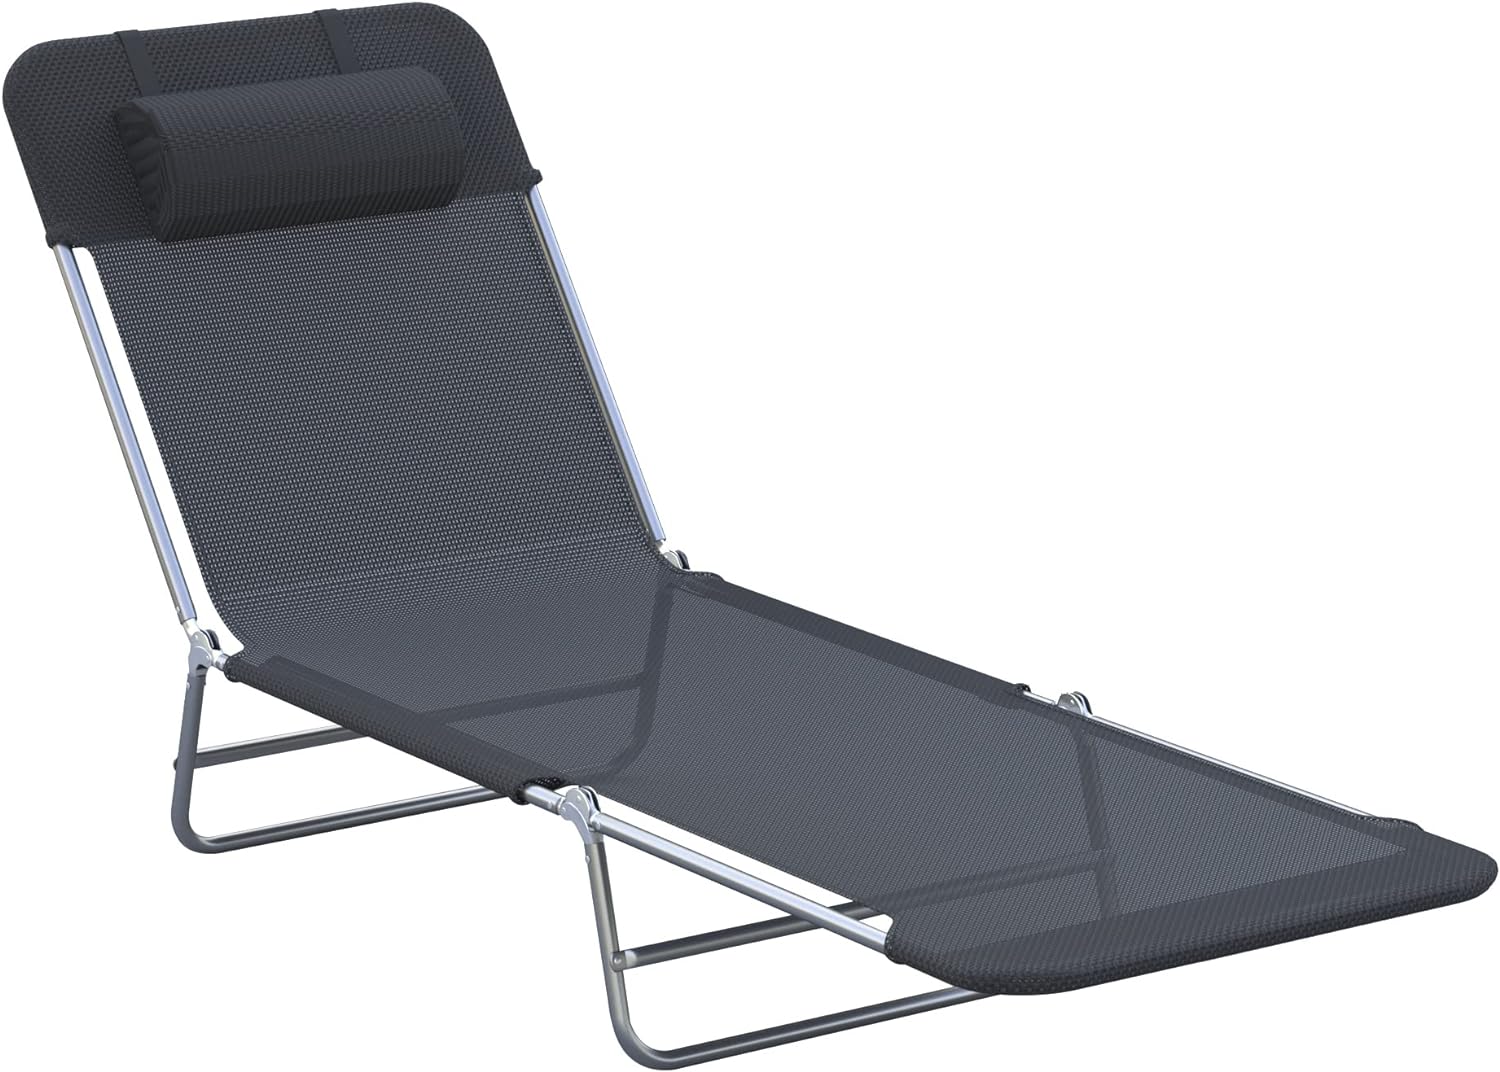 Outsunny Folding Chaise Lounge Pool Chairs, Outdoor Sun Tanning Chairs with Pillow